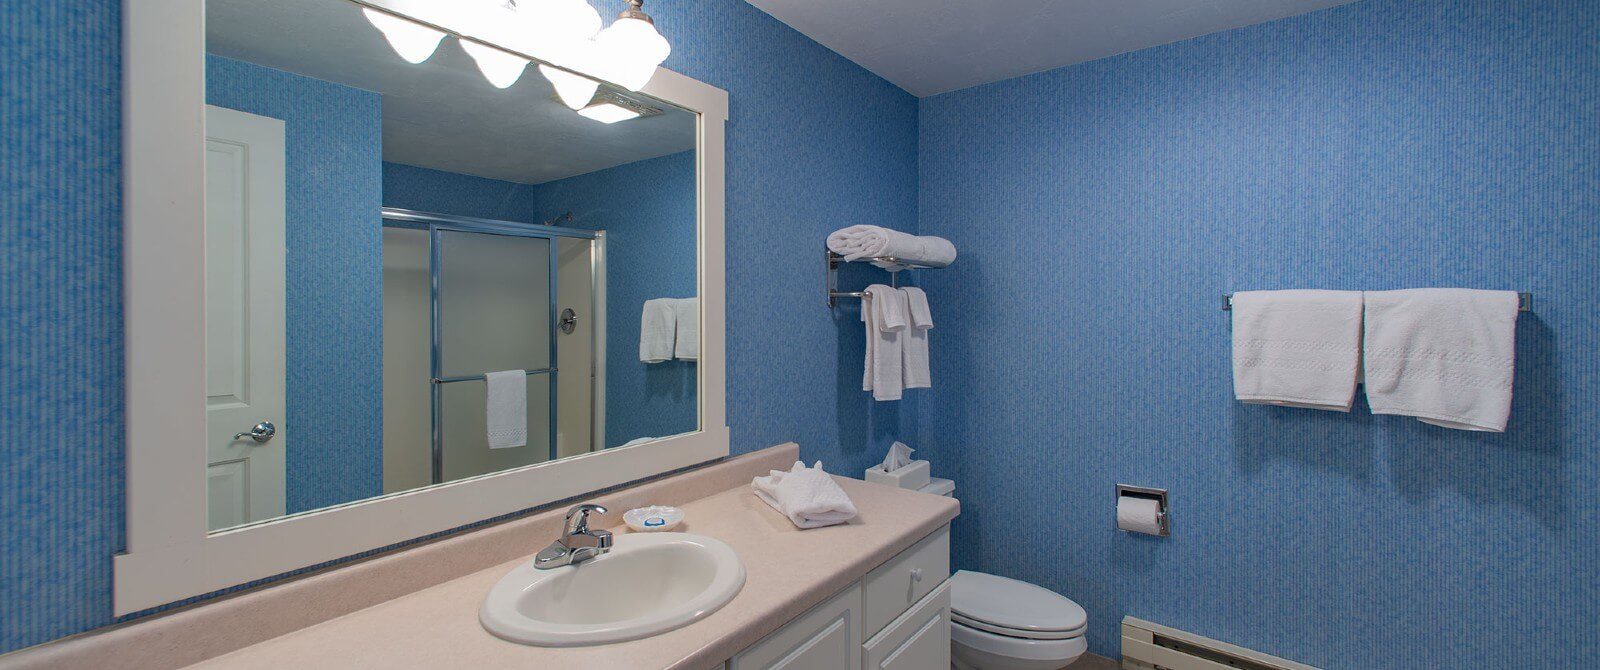 Bathroom with blue walls, large white framed mirror, single single, white hanging towels and stand up shower with sliding doors